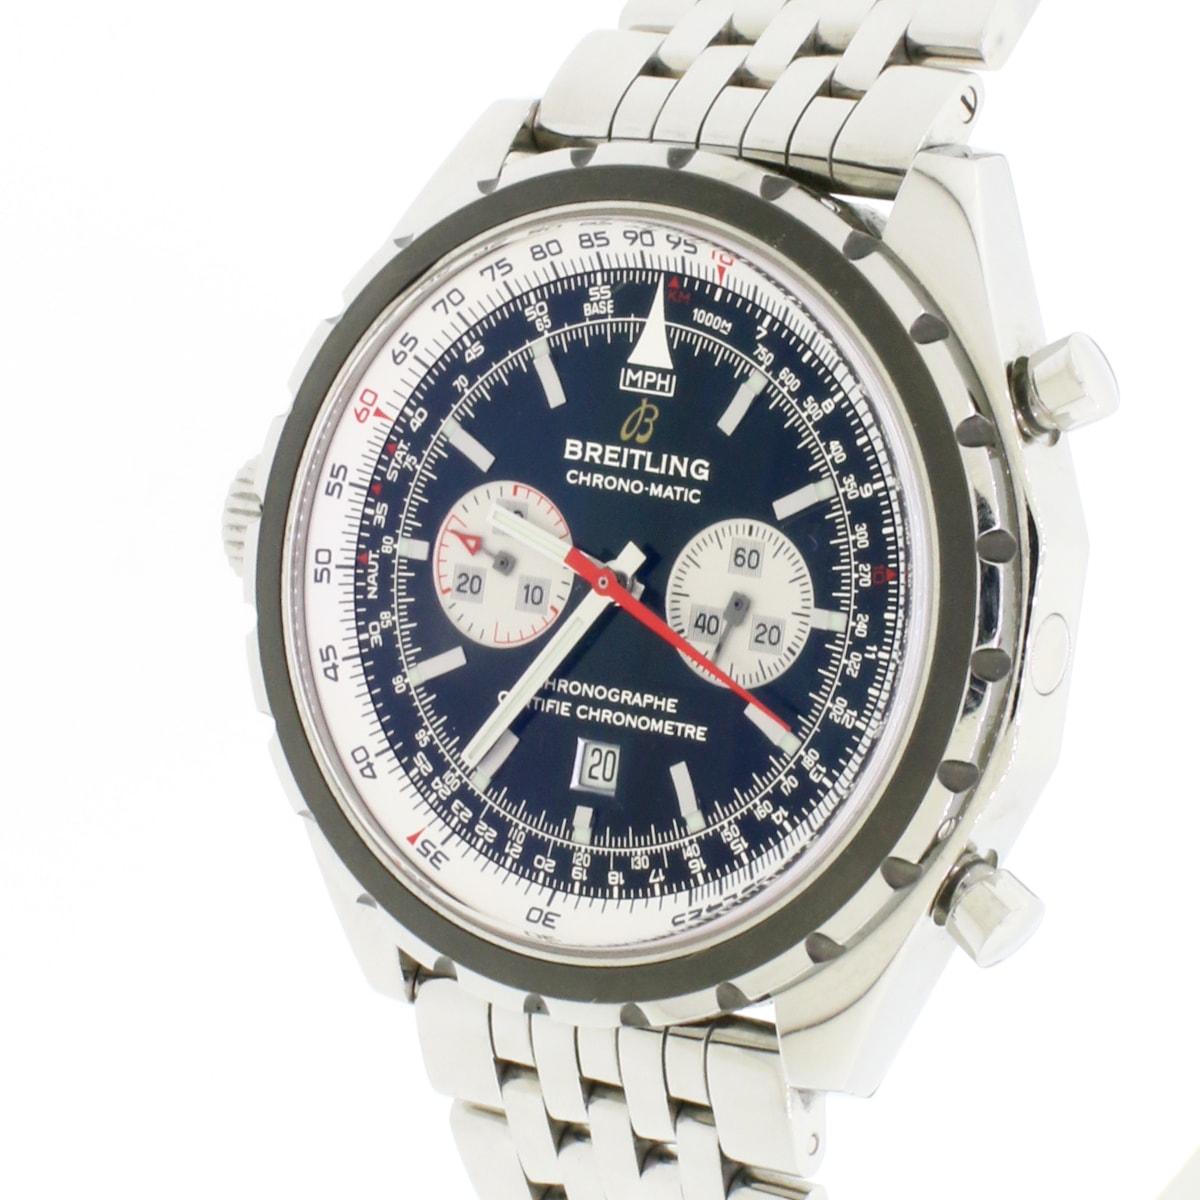 Breitling Chrono-Matic Automatic Chronograph Stainless Steel Men’s Watch In Excellent Condition For Sale In New York, NY